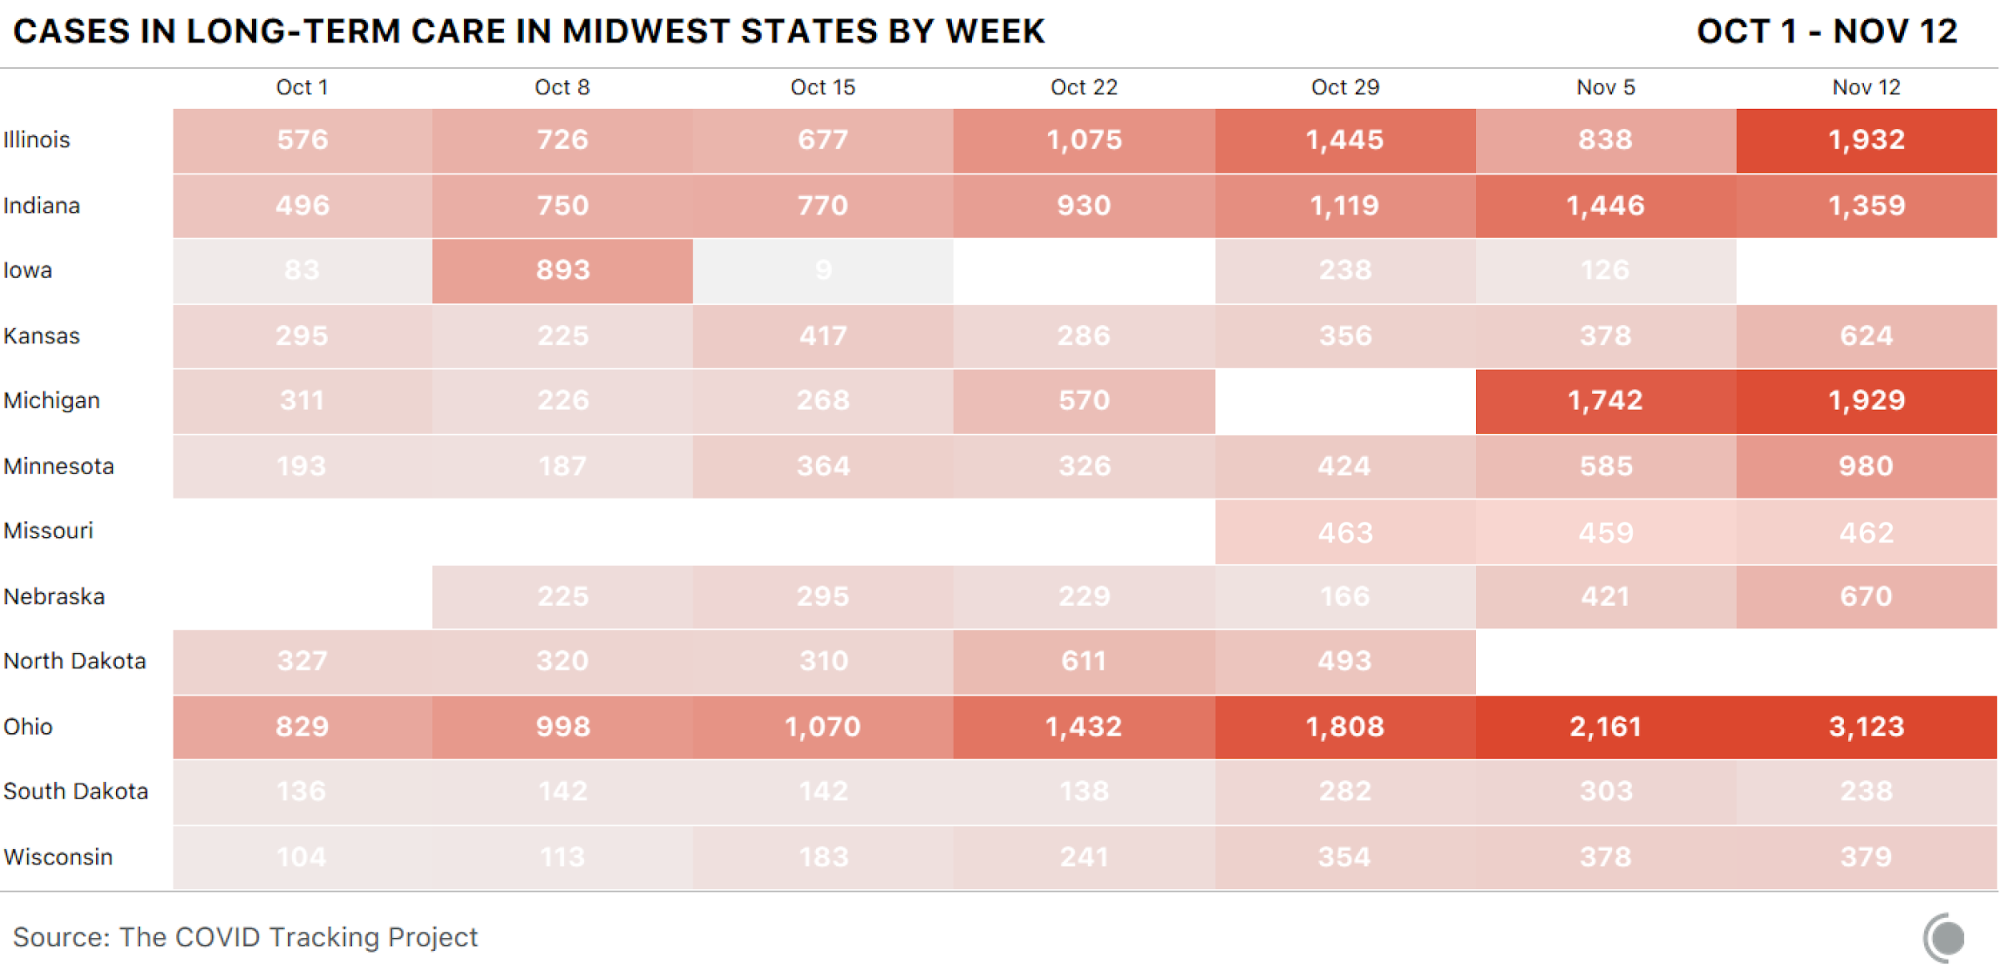 Color coded table showing the number of cases for each Midwest state in long-term care facilities by week. Recent weeks have seen record highs in Ohio, Illinois, Michigan, Minnesota, Indiana, Kansas, Nebraska, and Wisconsin.